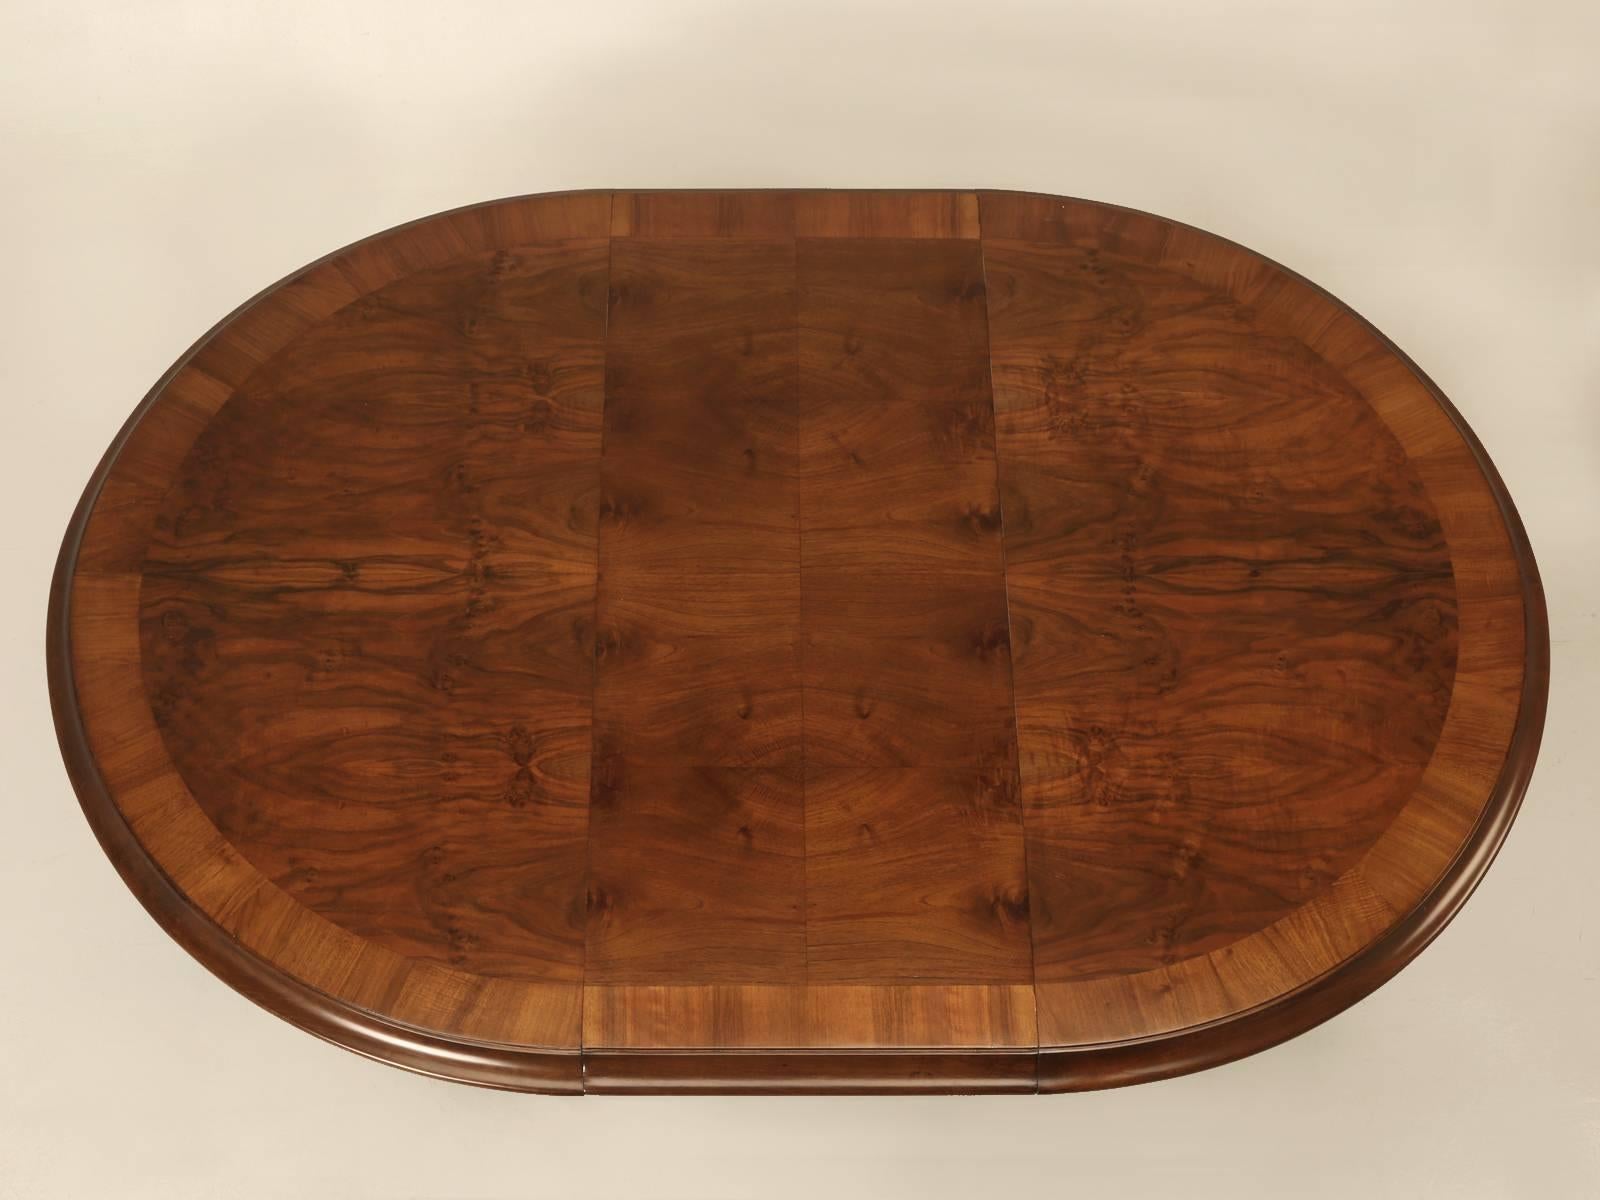 French Burl-Walnut Round Dining Table with Leaf 1